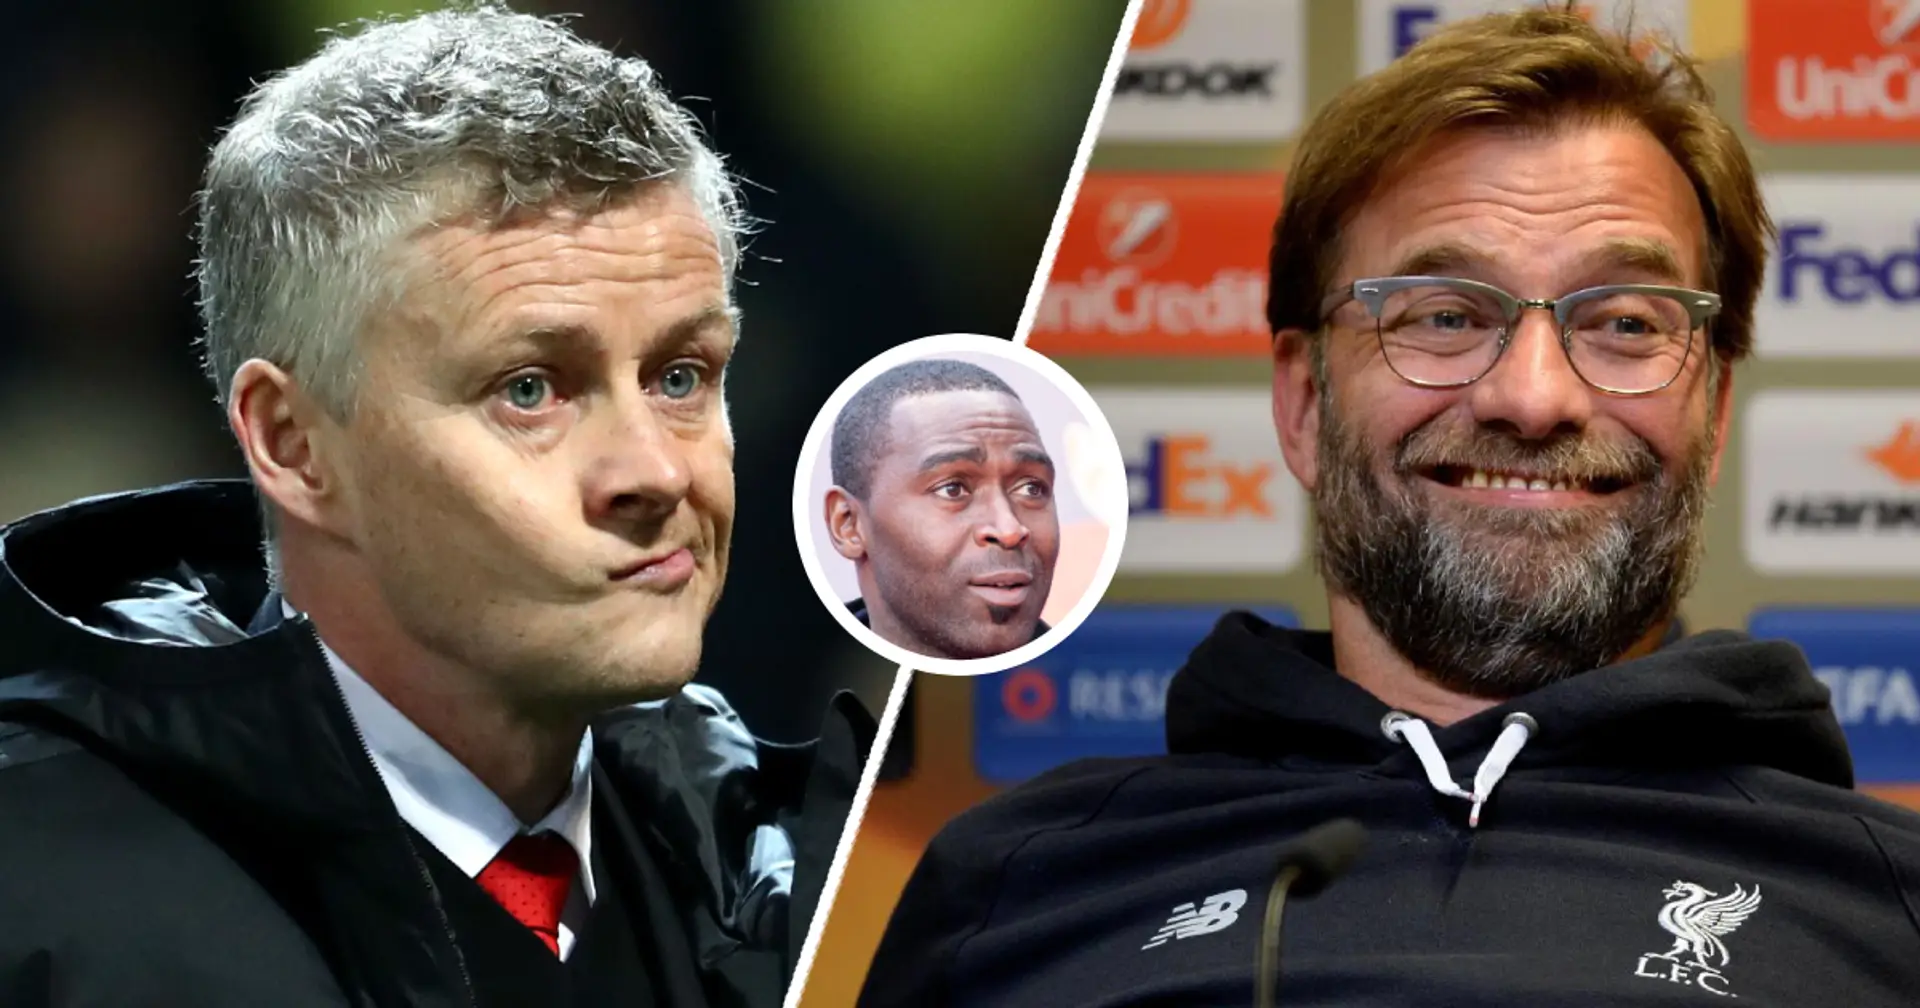 'I never want to see Man United in their position - waiting 30 years for a league title': Ex-Red Devil Andy Cole takes dig at Liverpool, believes his old club can challenge for title in a couple of seasons